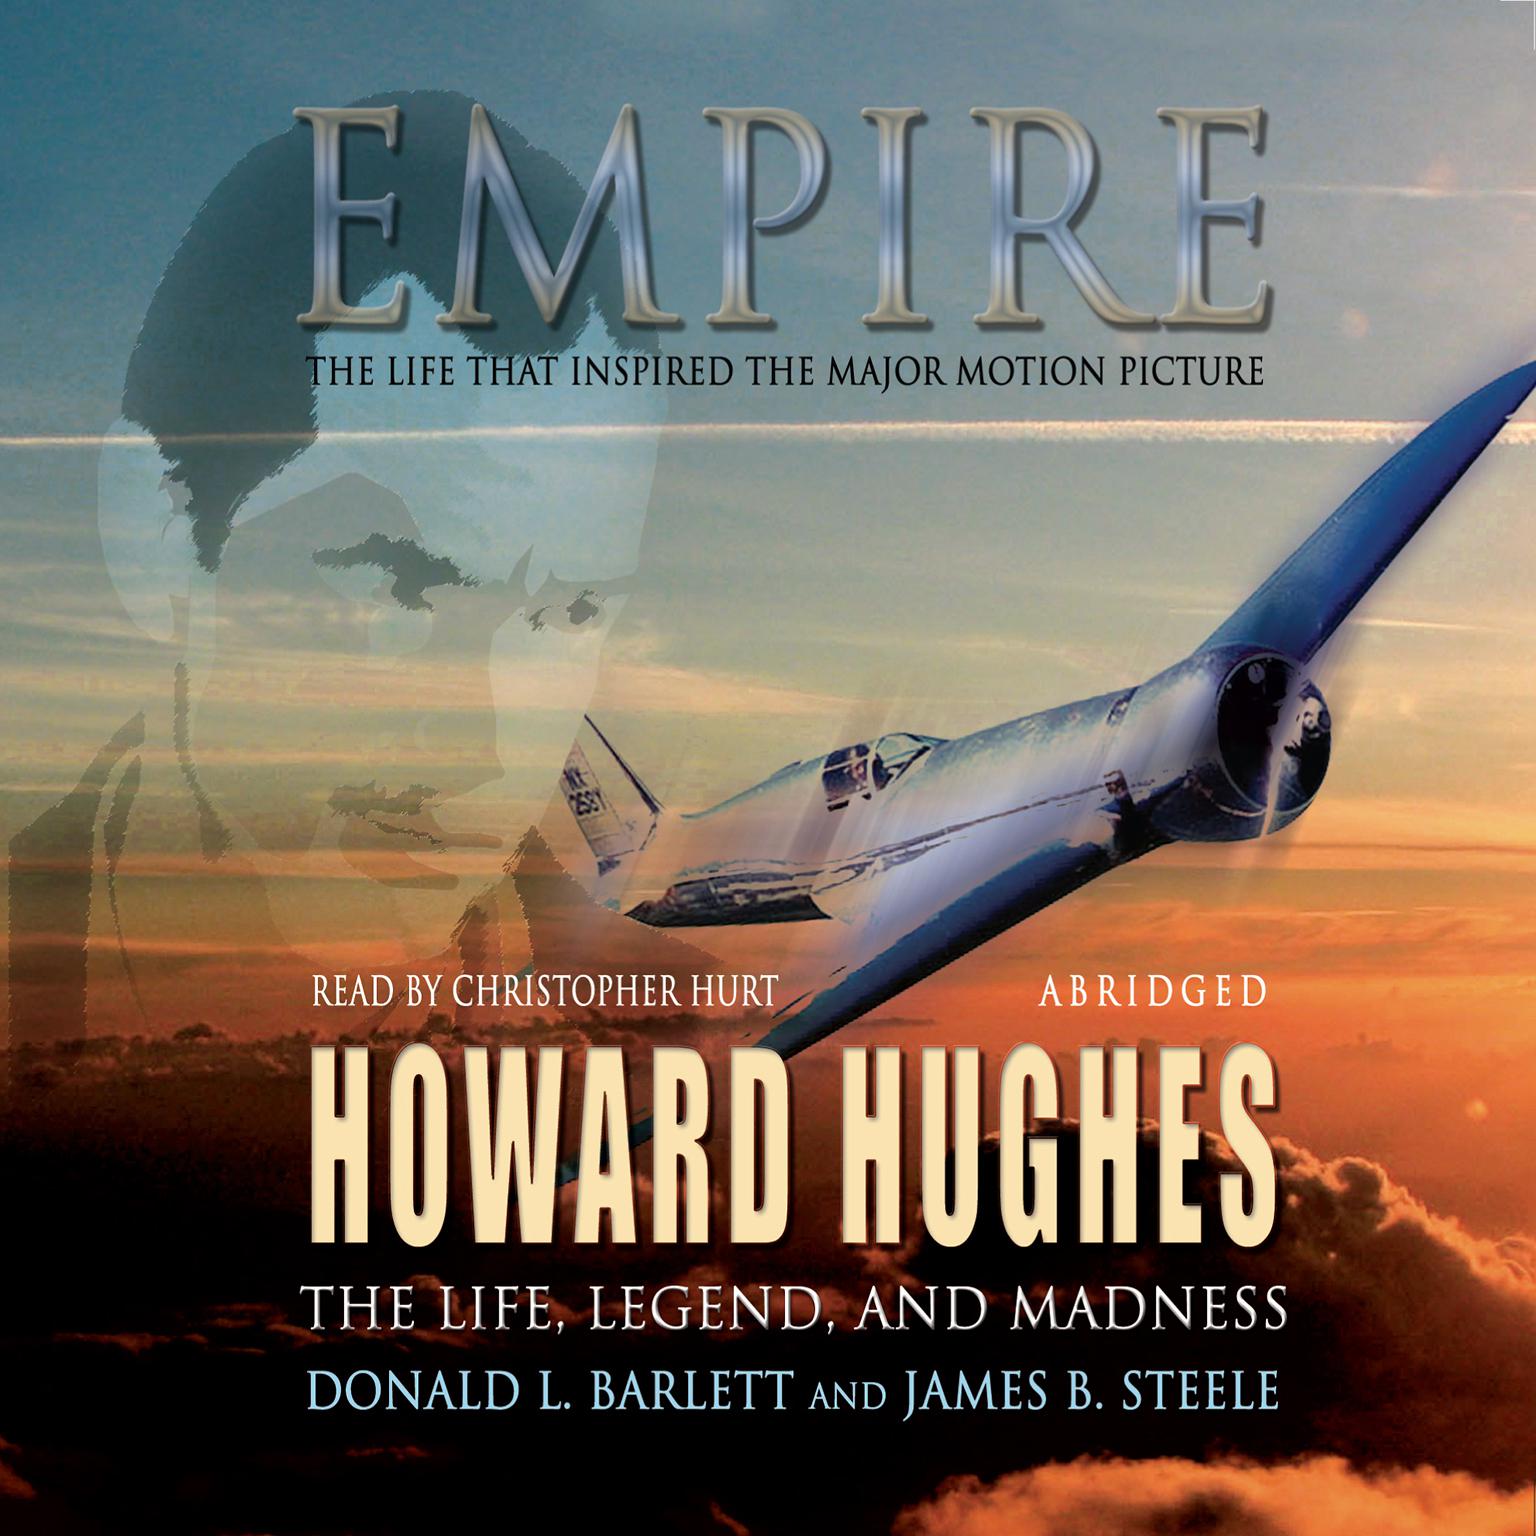 Empire (Abridged): The Life, Legend, and Madness of Howard Hughes Audiobook, by Donald L. Barlett